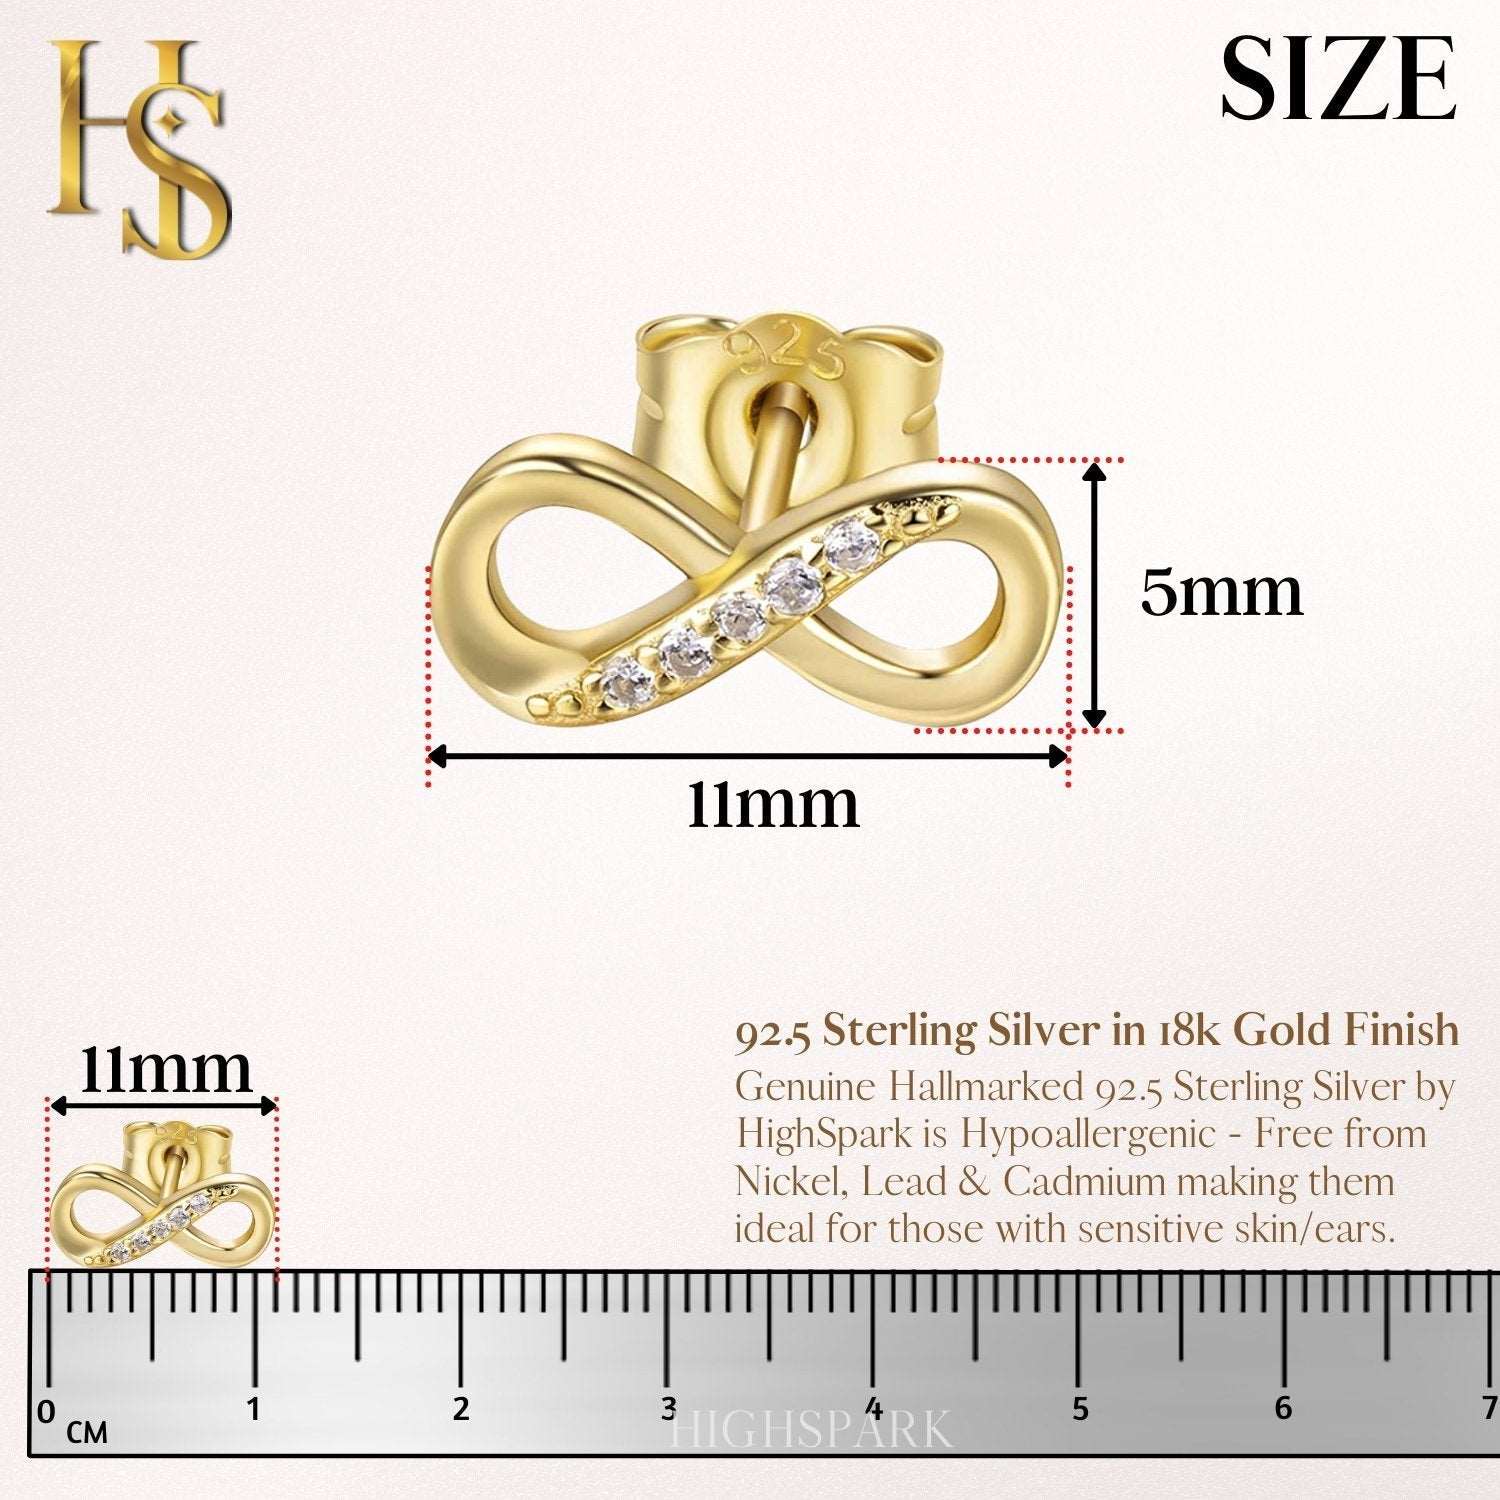 Gold Infinity Earrings in 92.5 Silver studded with Swiss Zirconia - 18K Gold finish